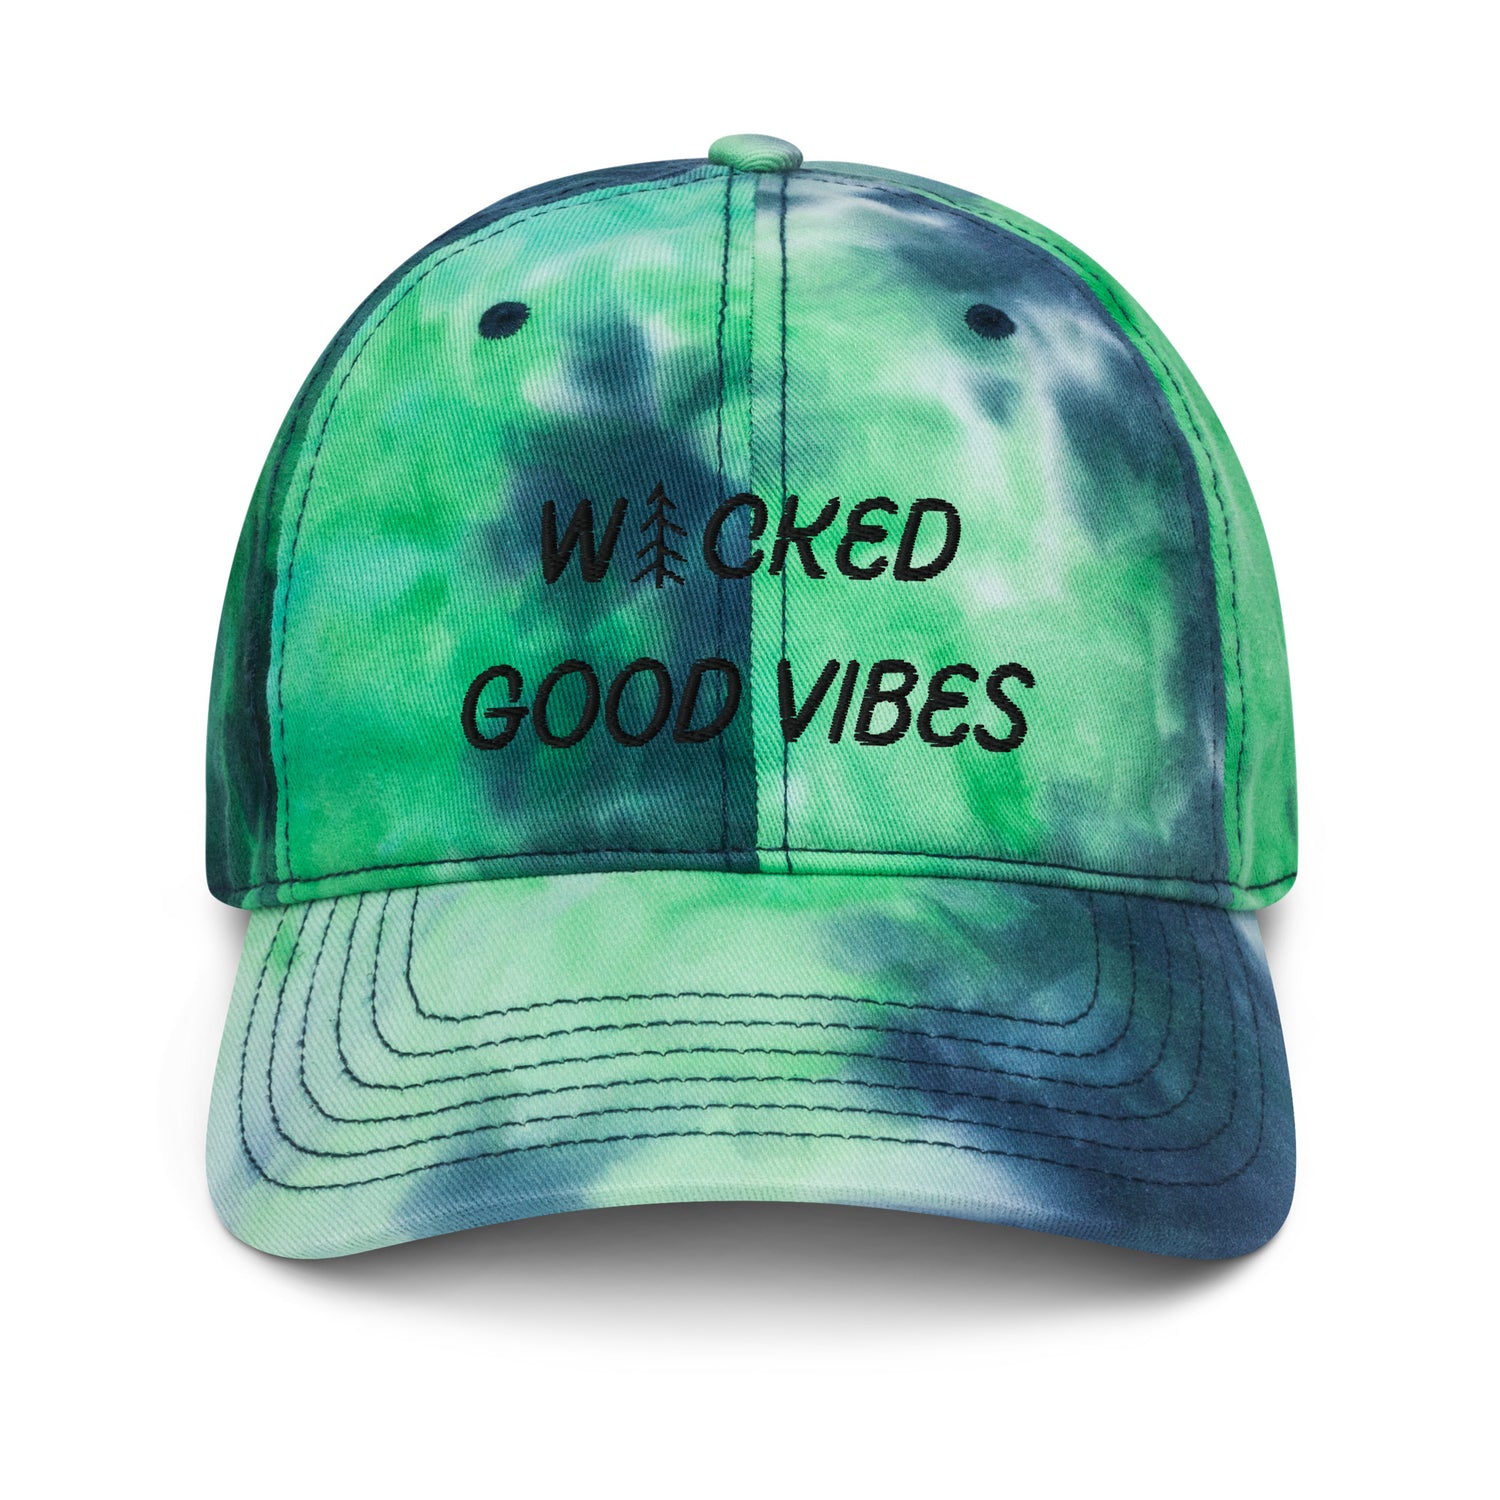 Wicked Good Vibes Tie dye hat (multiple color options)